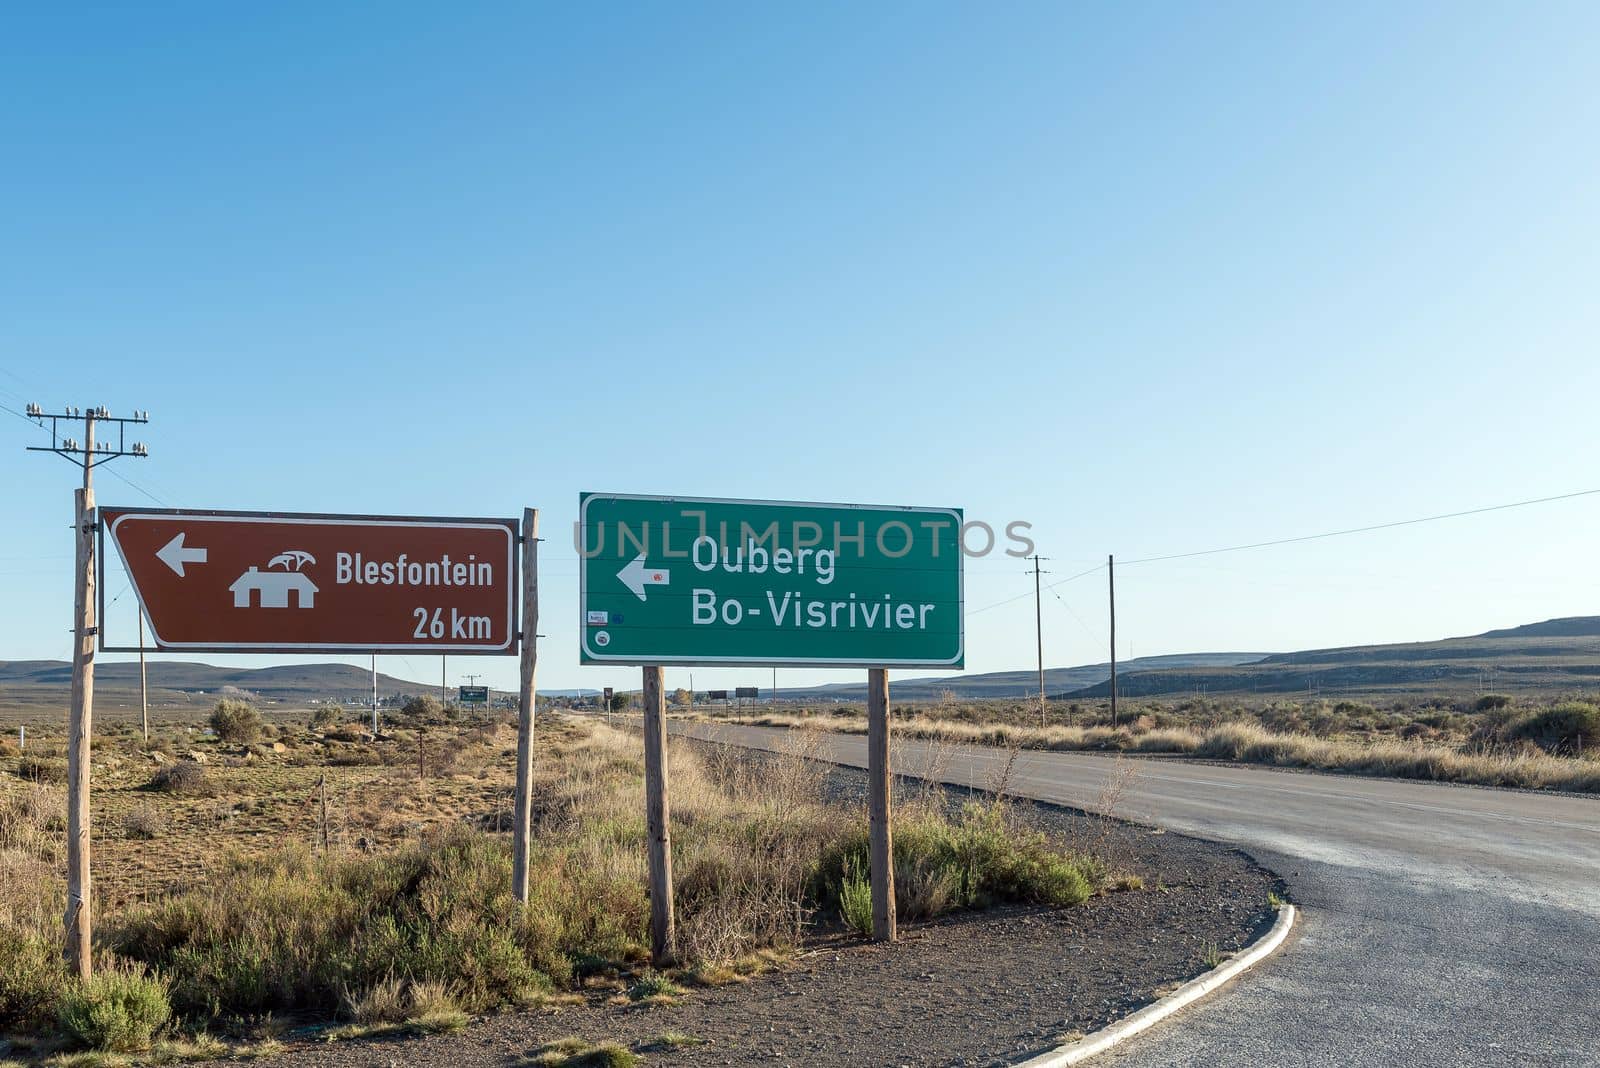 Directional signs at turn off from R354 to Ouberg Pass by dpreezg